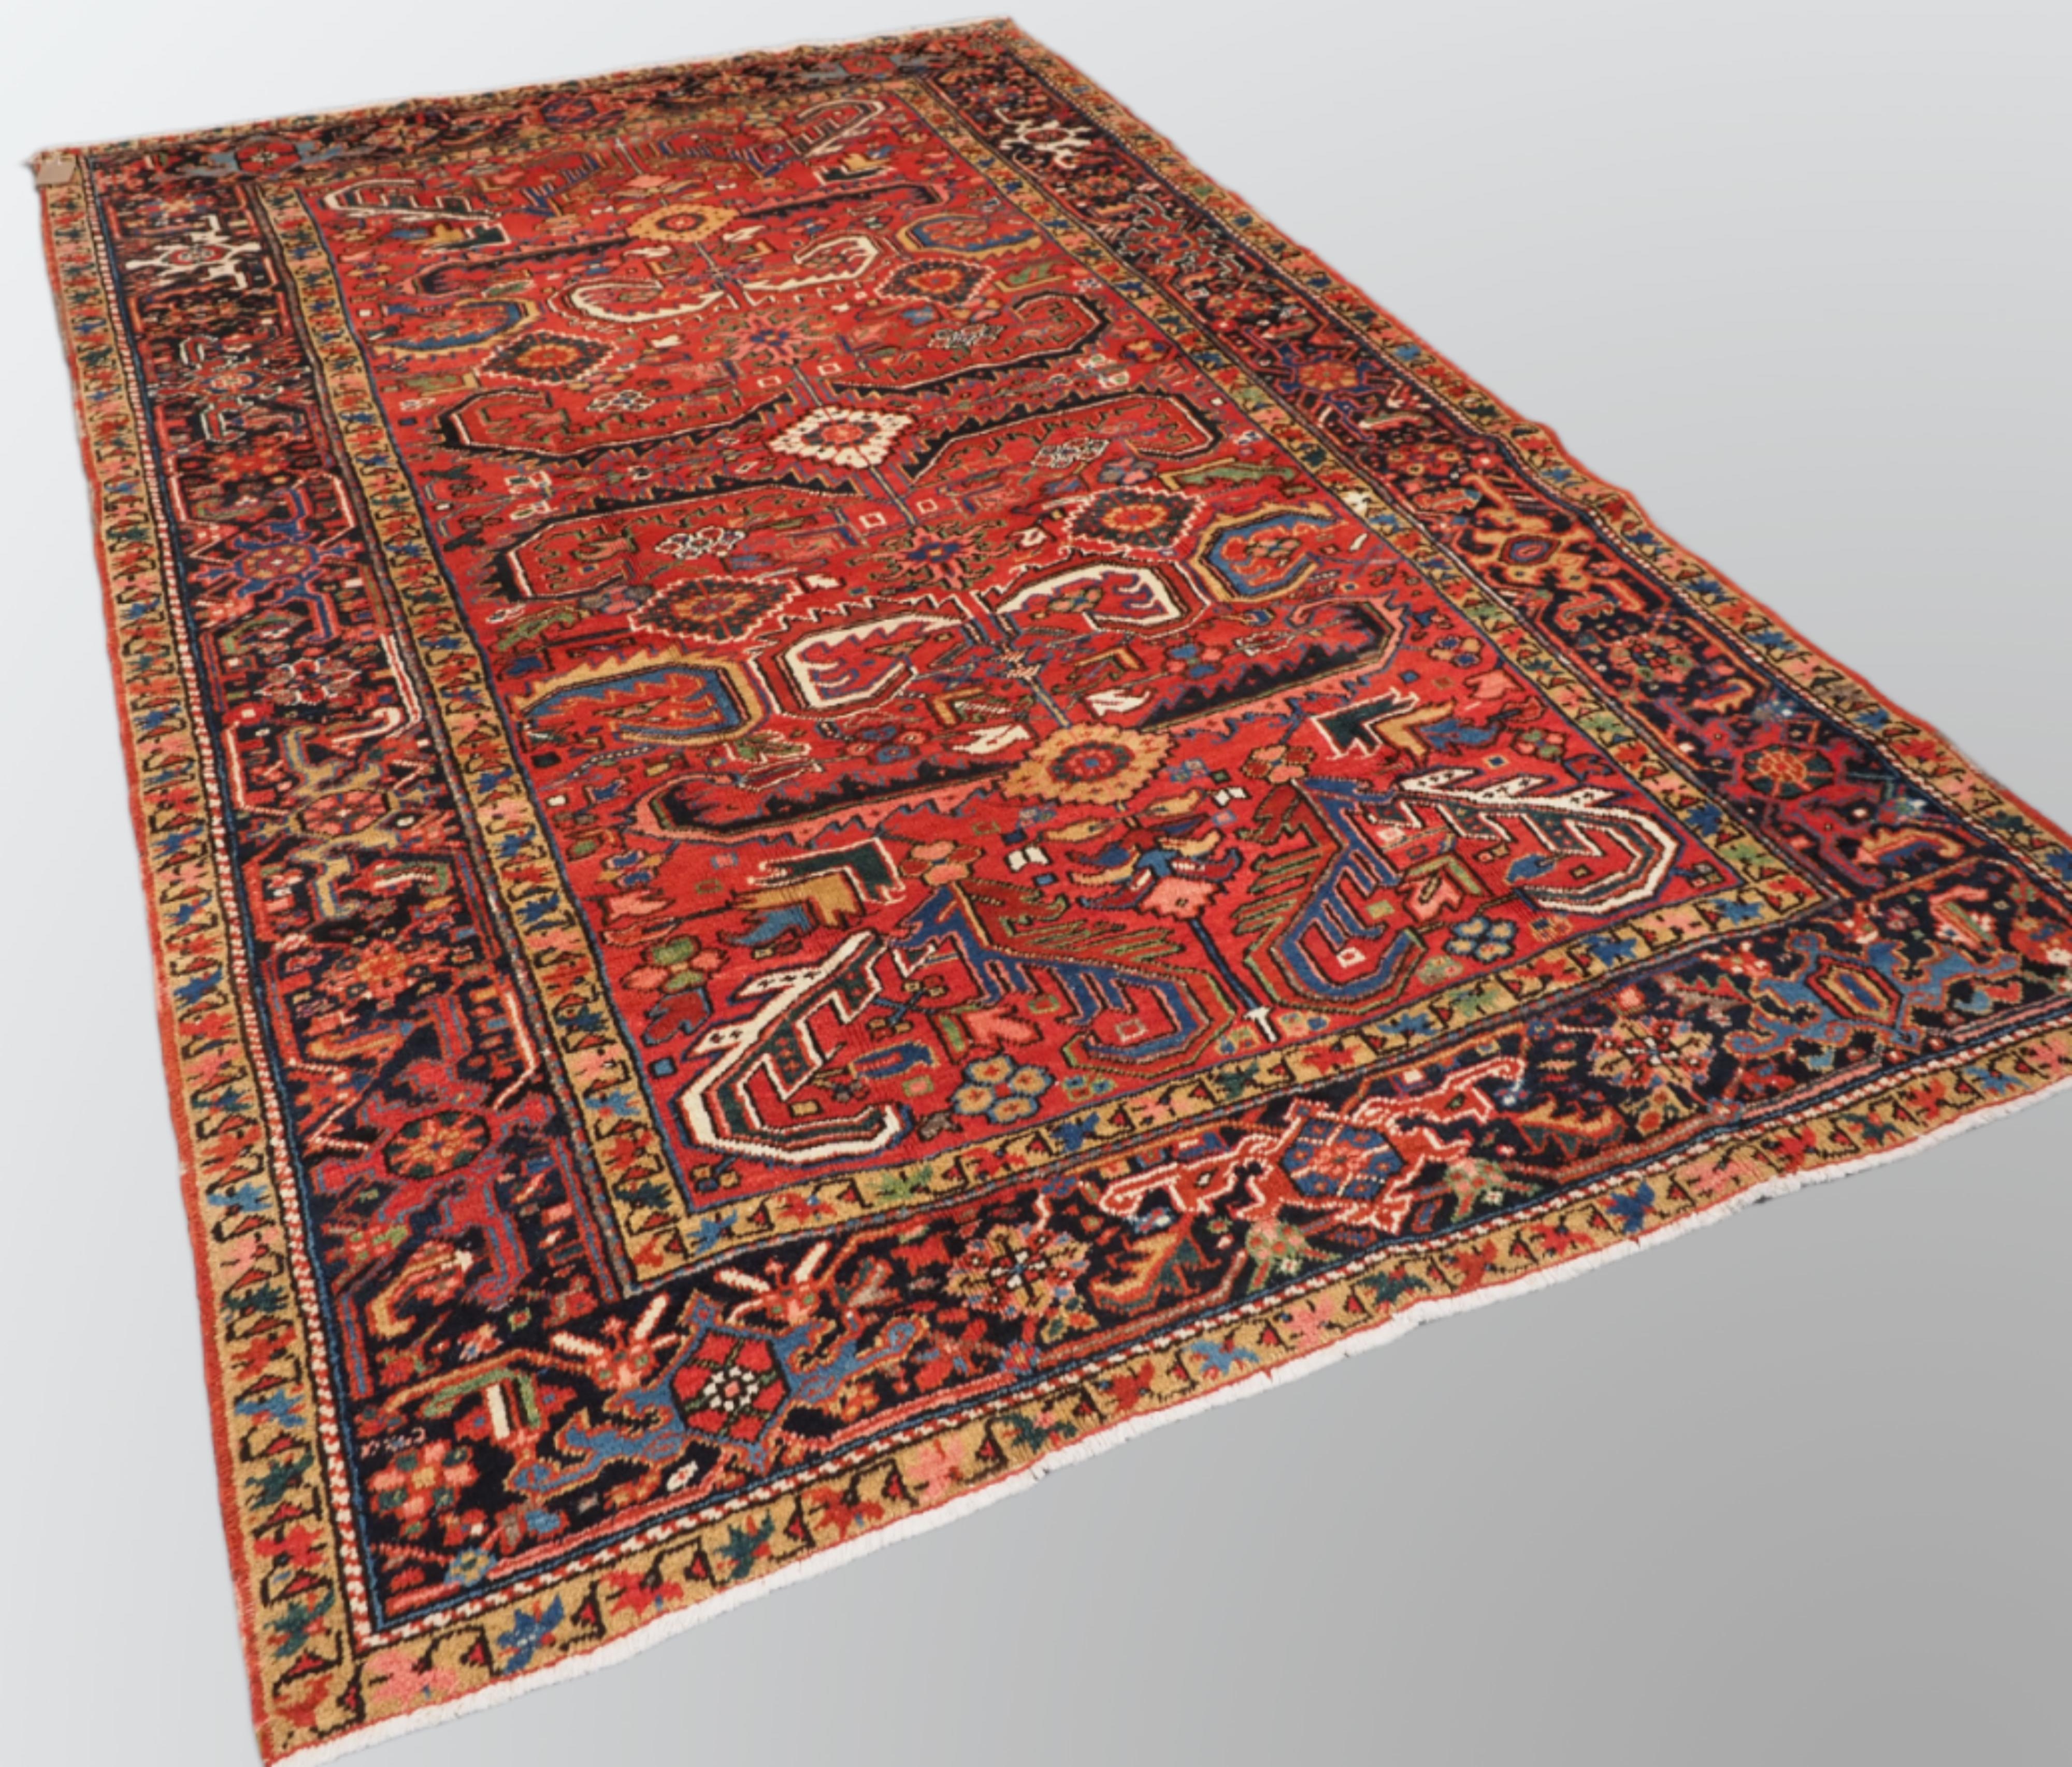 Size: 9ft 7in x 6ft 6in (292 x 197cm).

Antique Heriz carpet with a traditional all over design, soft colours on a warm red ground giving a light feel. Classic dark indigo blue border.

Circa 1910.

A very good Heriz carpet in a hard to find small